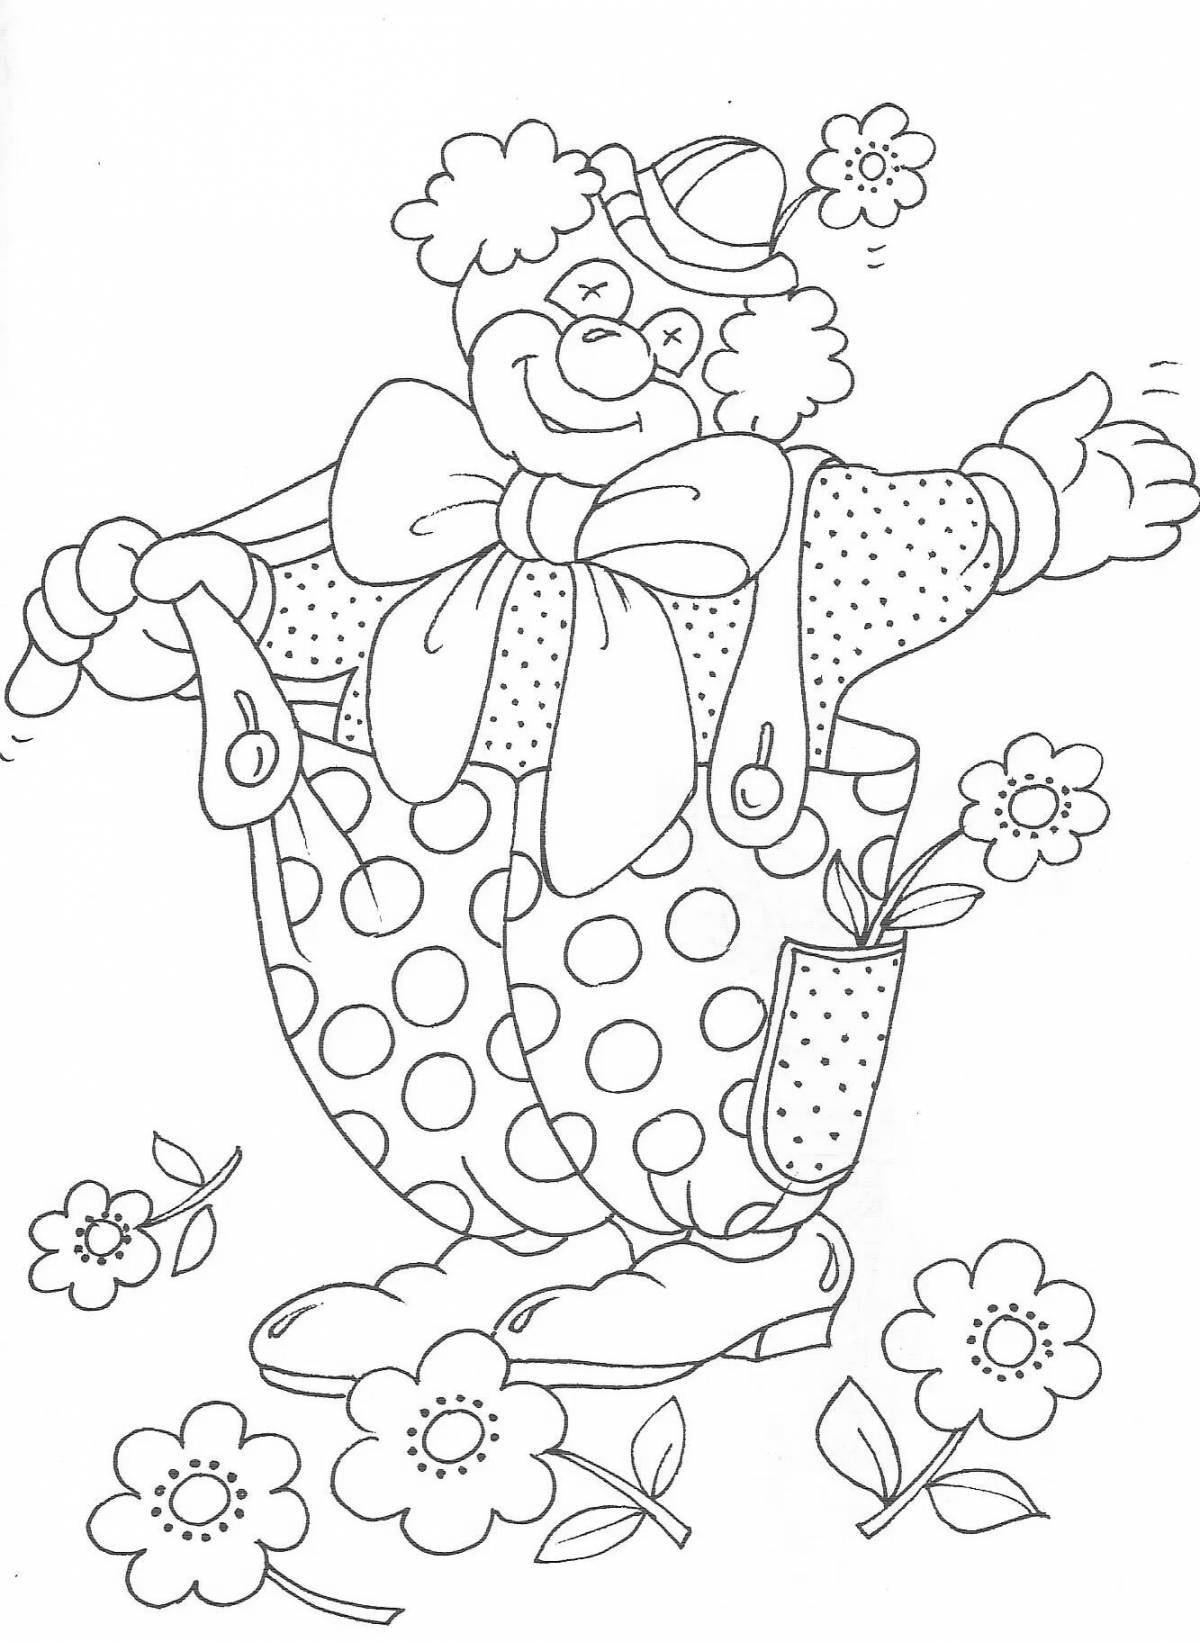 Charming jester coloring book for kids